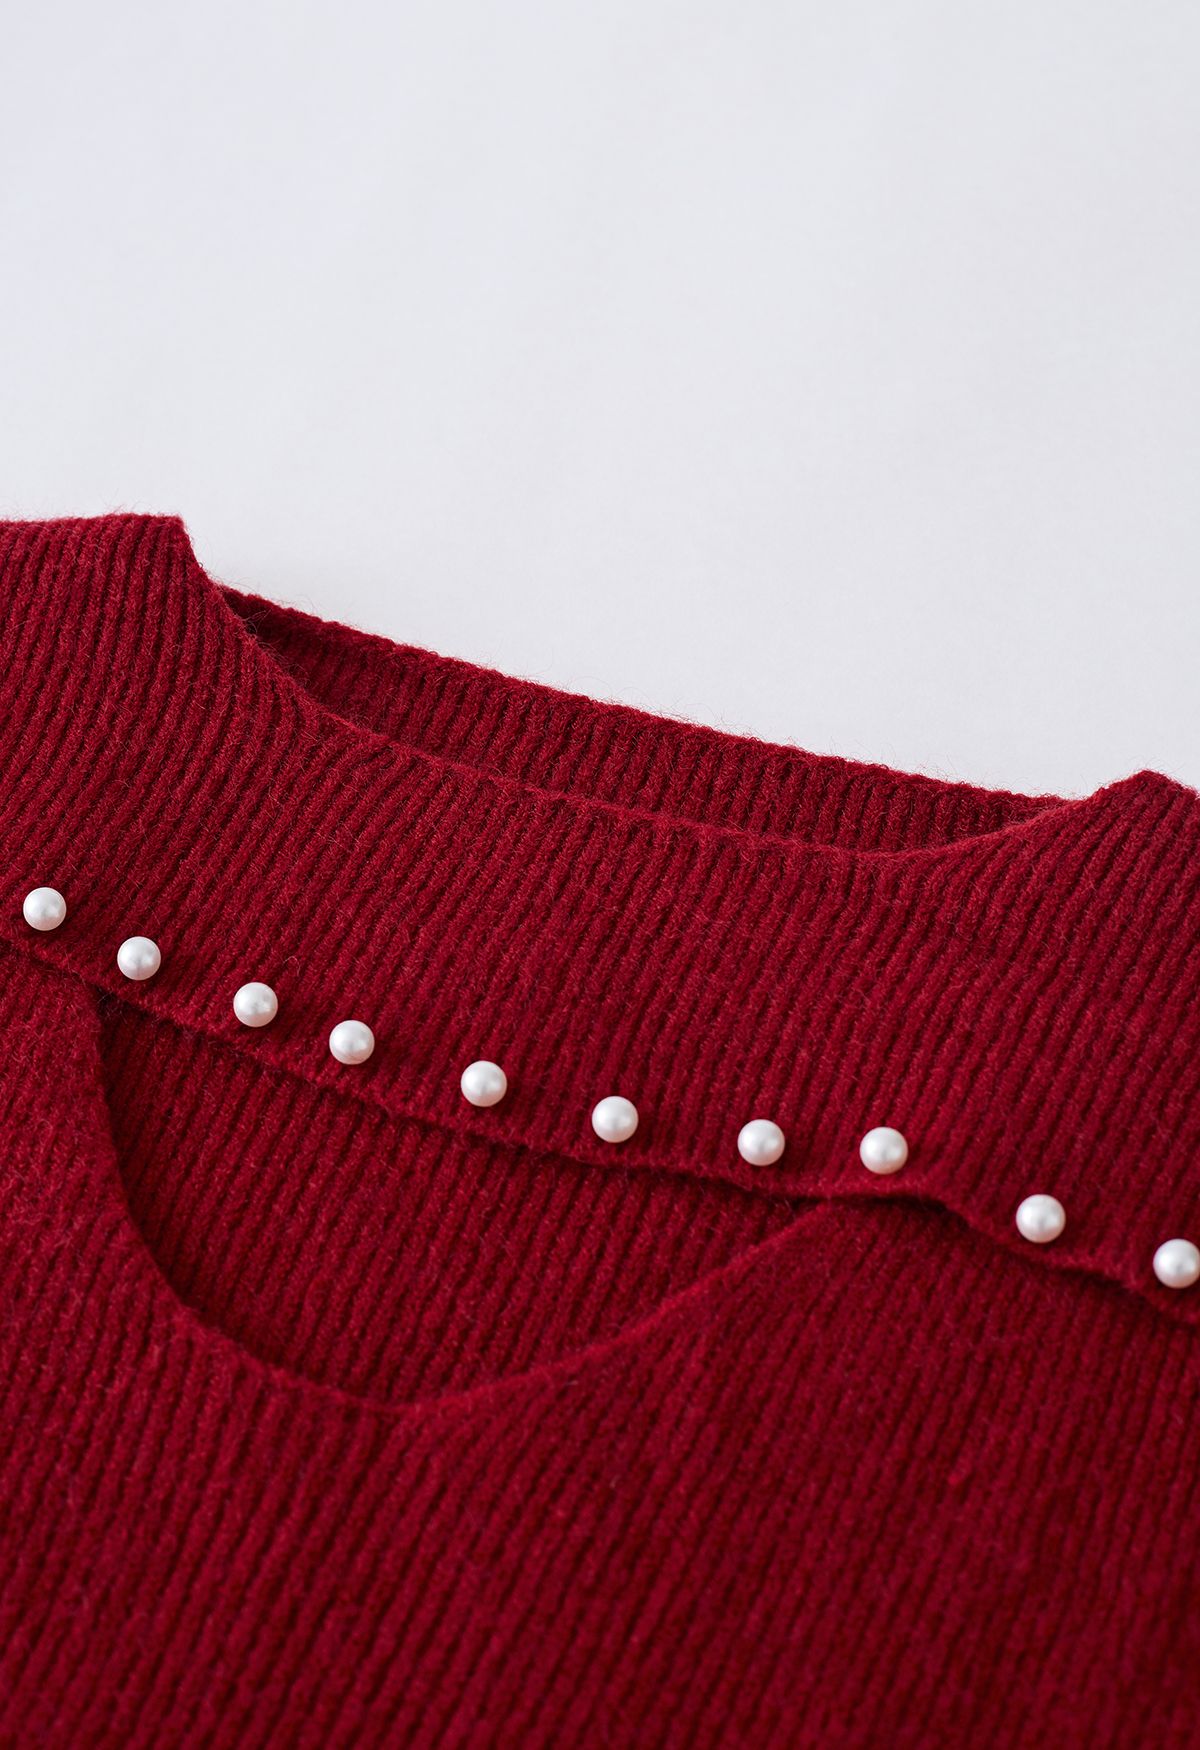 Cutout Pearl Neckline Knit Sweater in Red